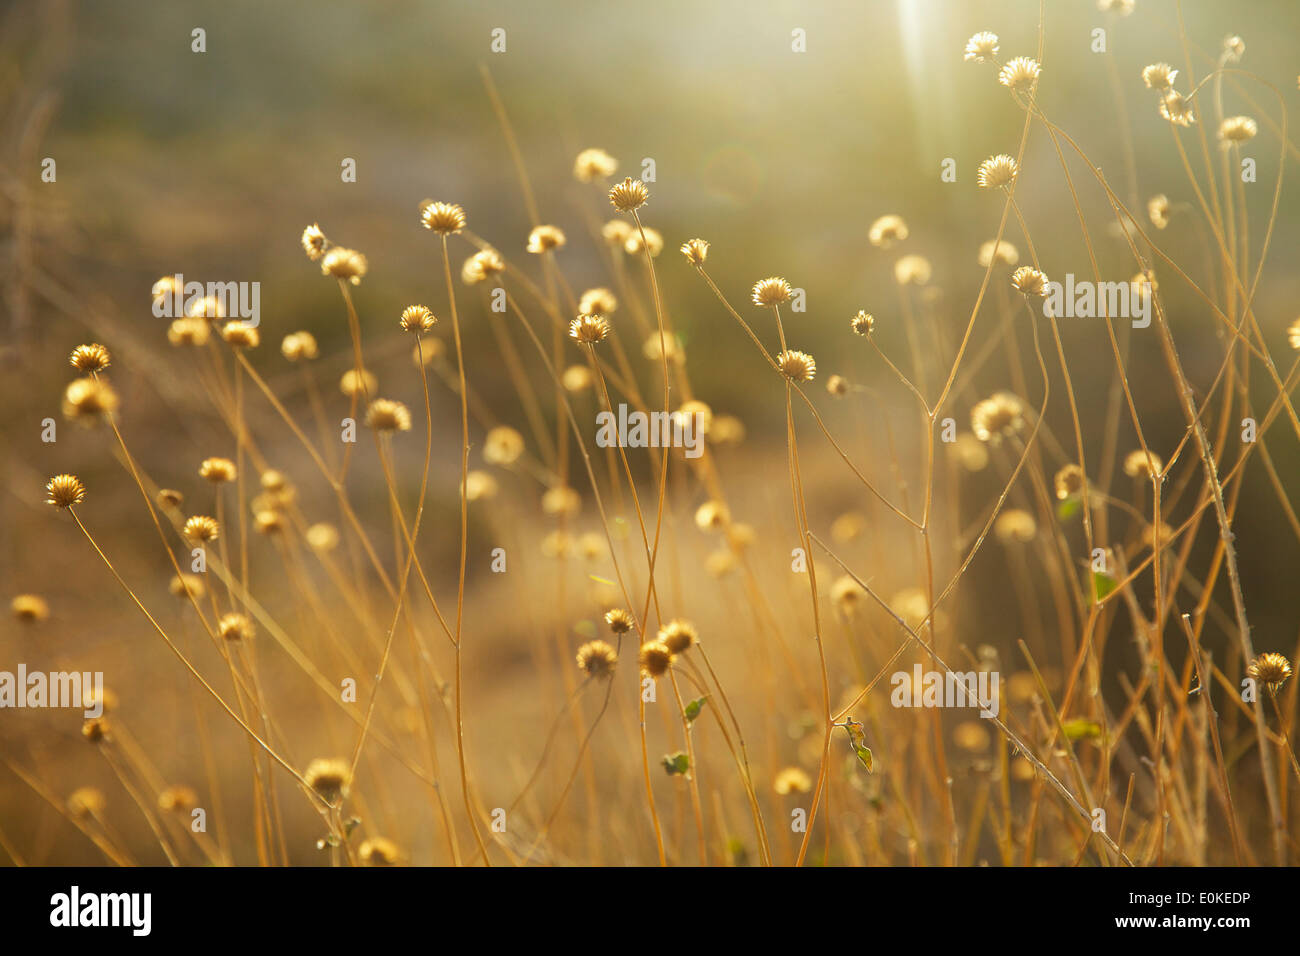 Dried flowers are back lit with golden light in Joshua Tree National Park in Southern California. Stock Photo